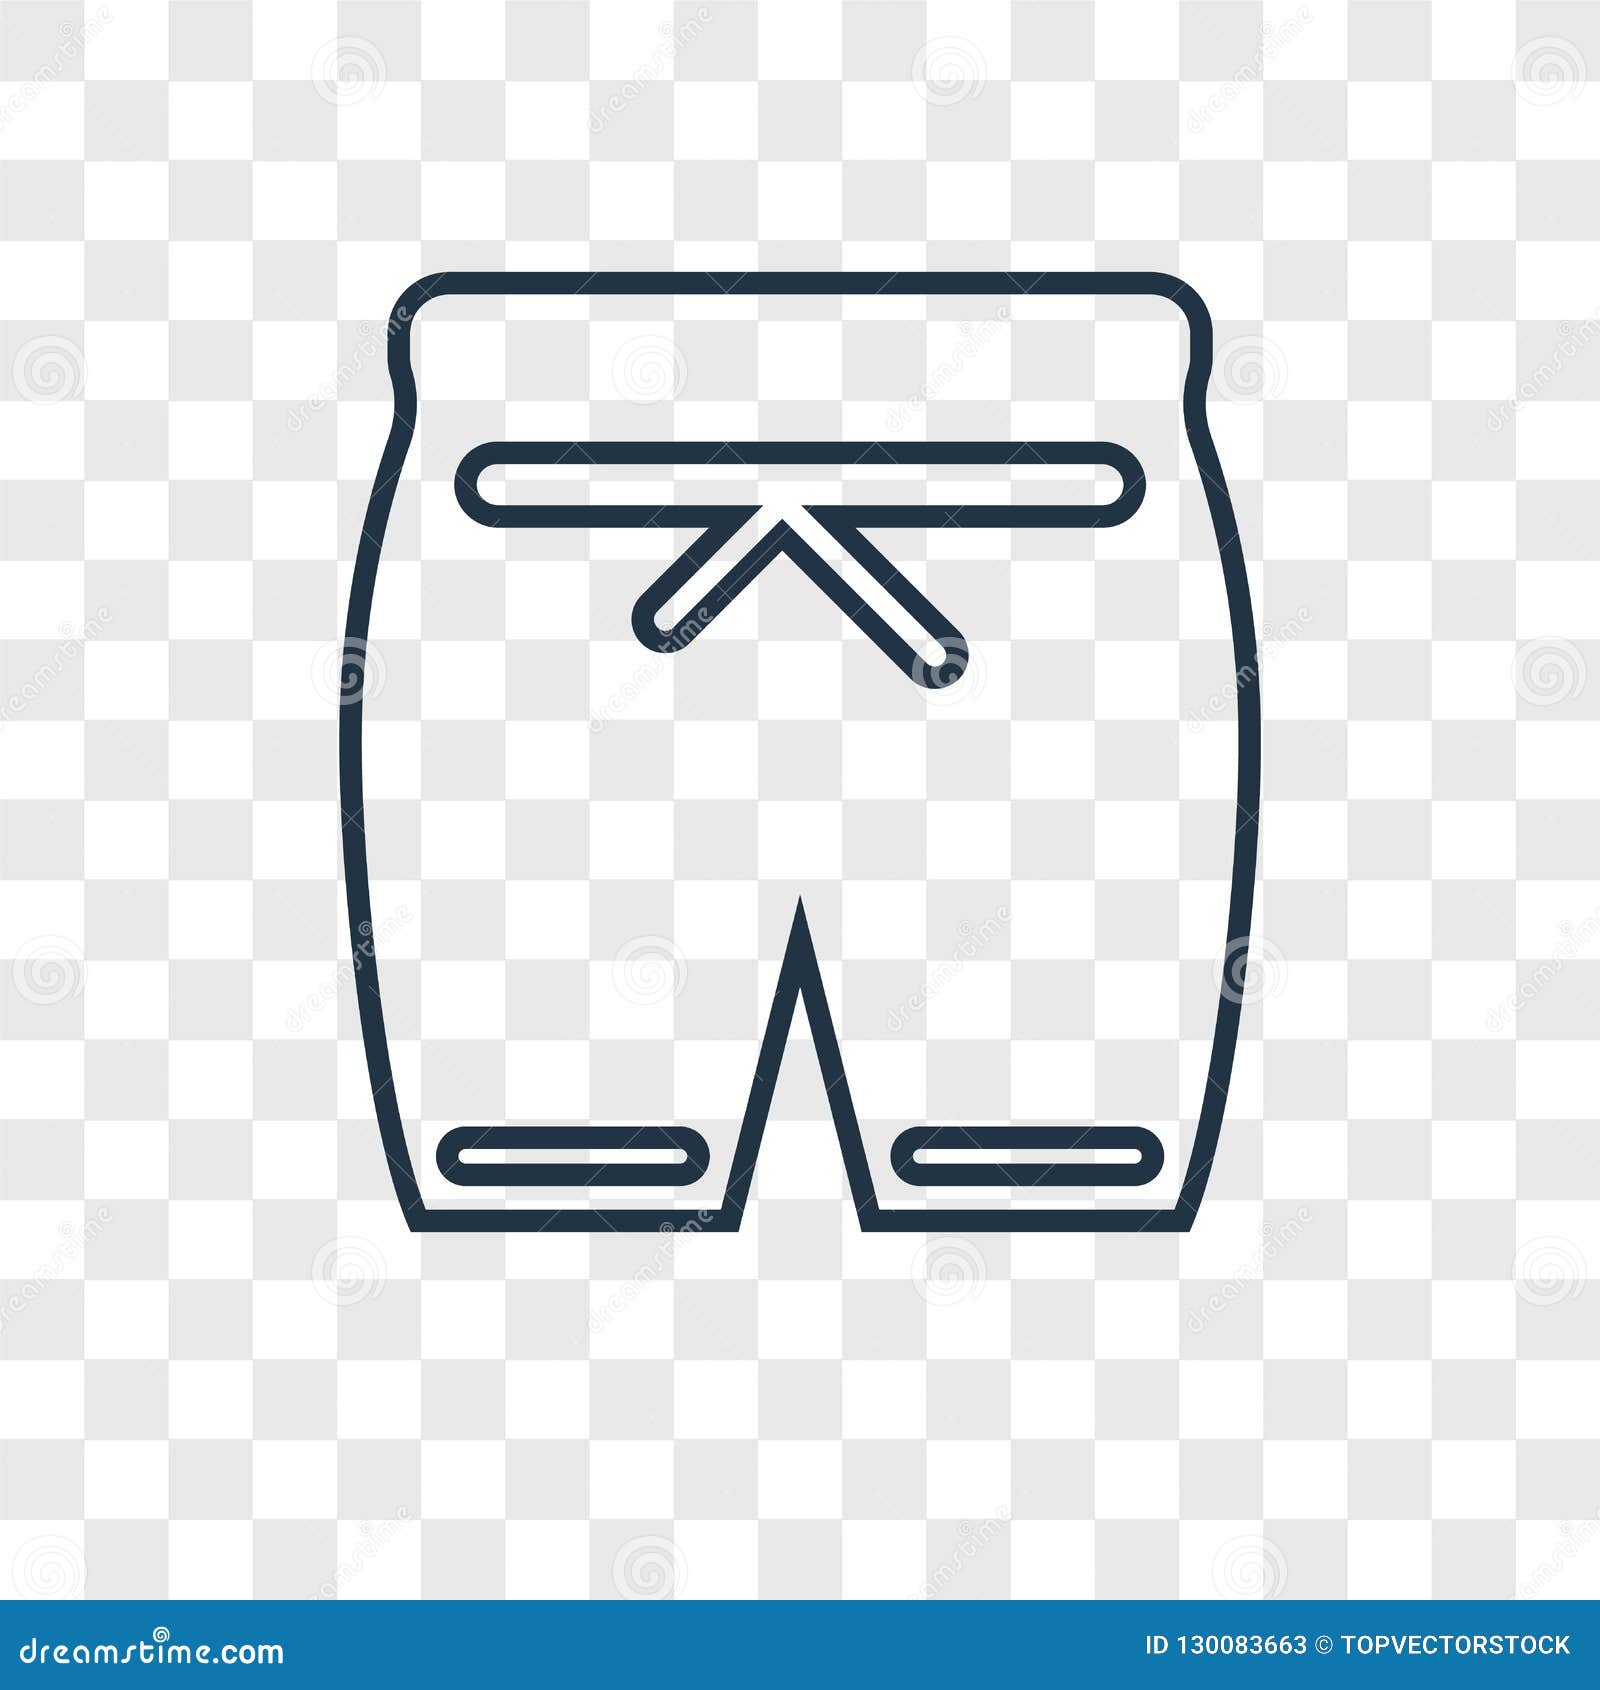 Shorts Concept Vector Linear Icon Isolated on Transparent Background ...